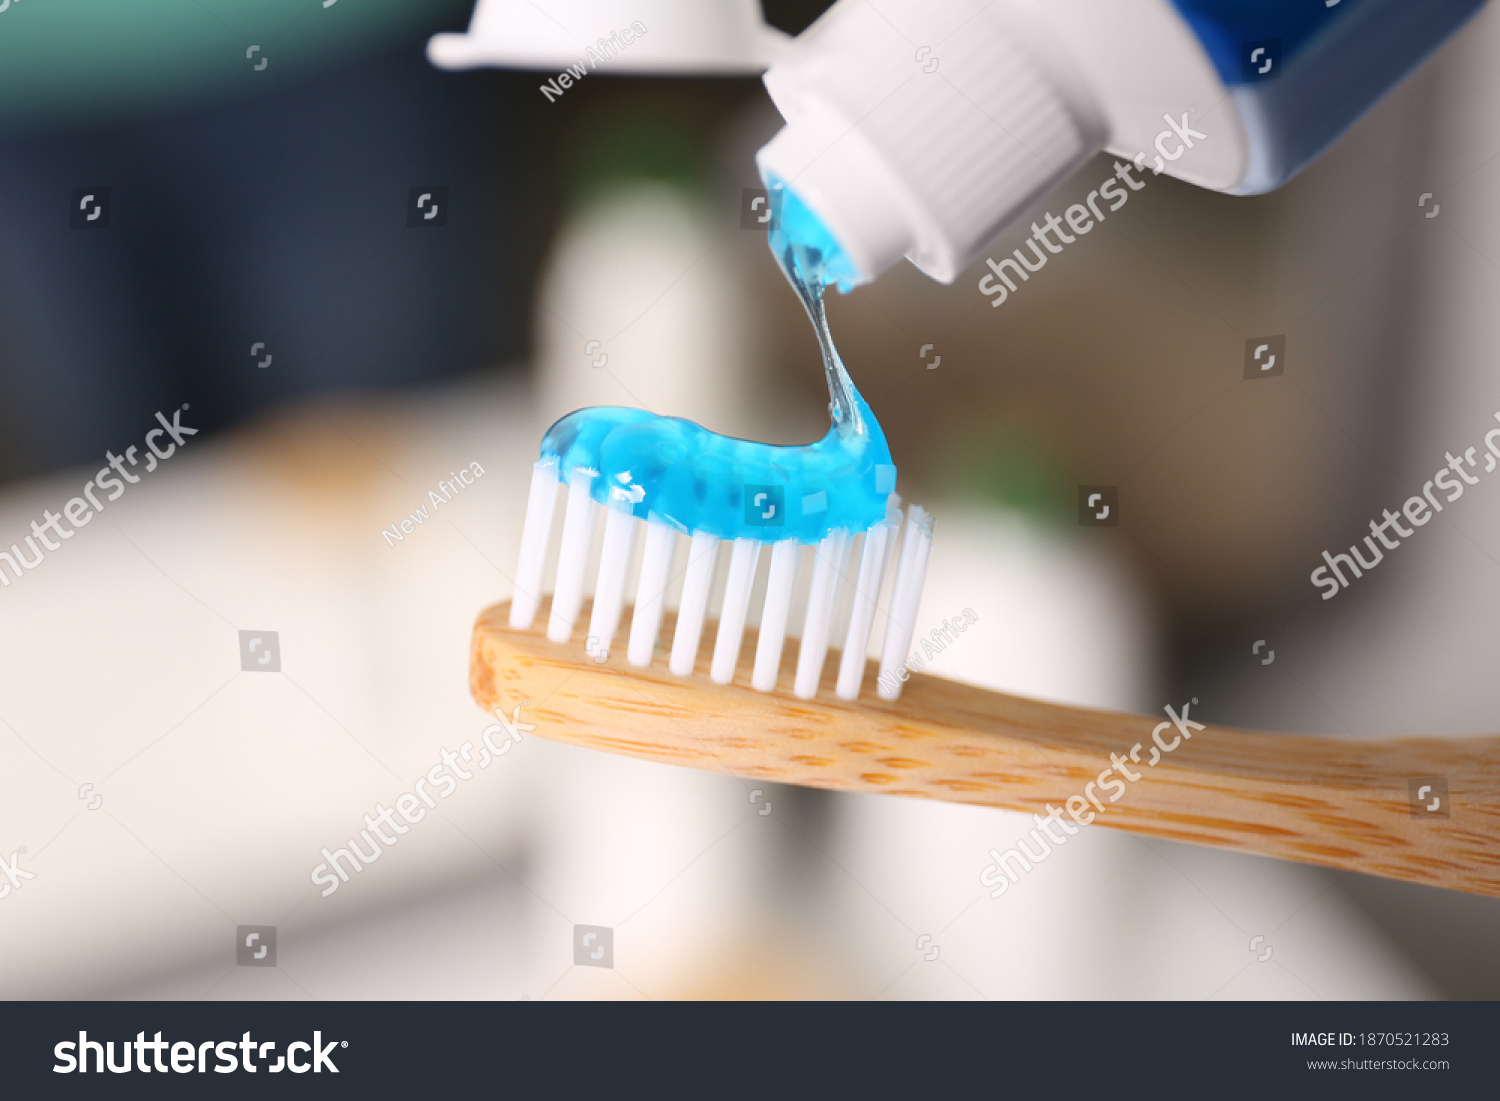 Applying toothpaste on brush against blurred background, closeup #1870521283